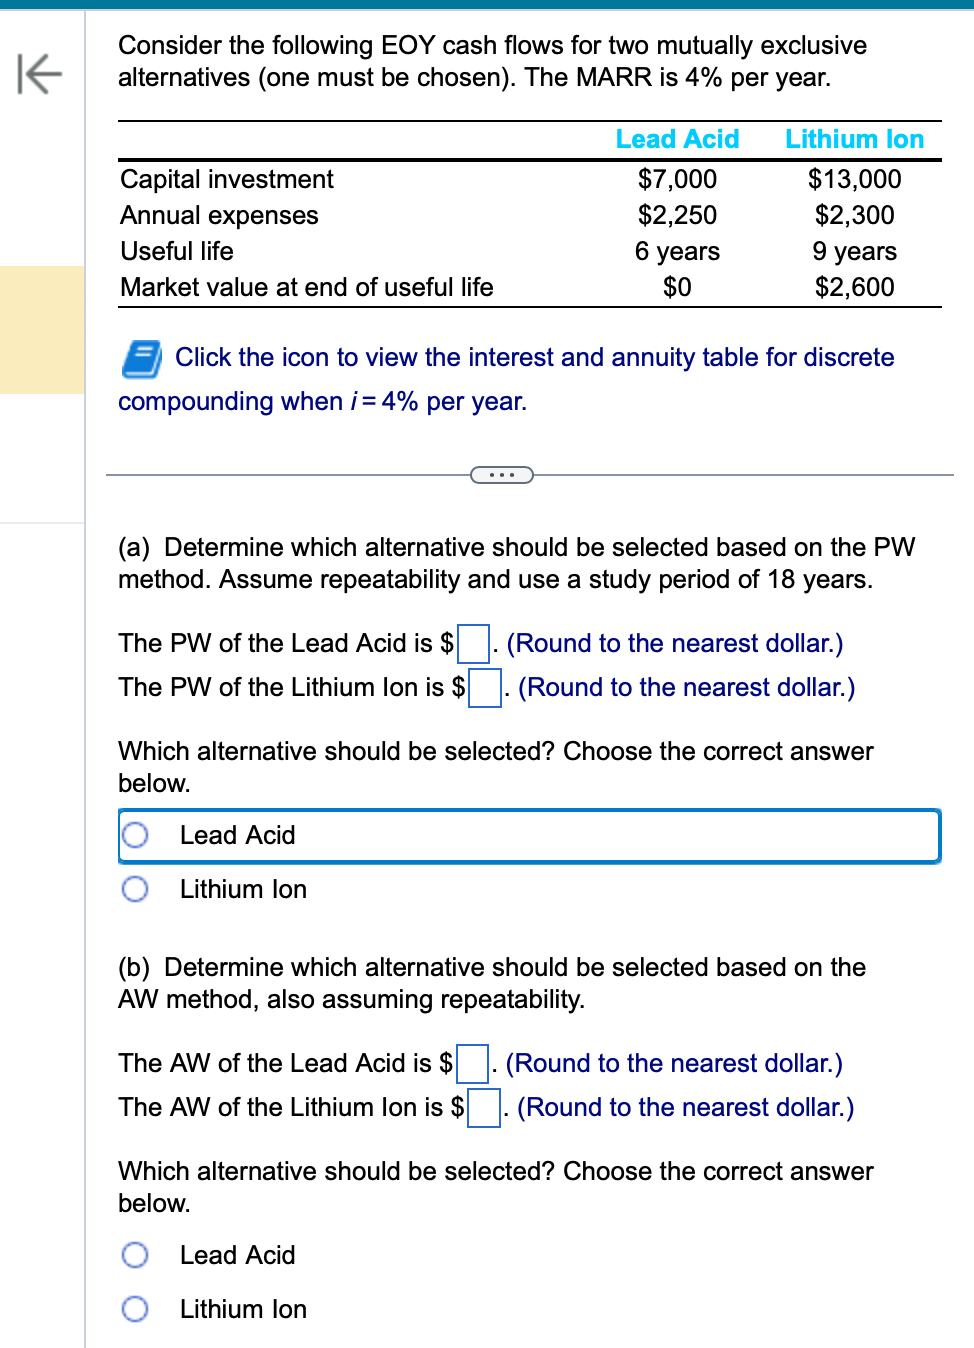 K
Consider the following EOY cash flows for two mutually exclusive
alternatives (one must be chosen). The MARR is 4% per year.
Capital investment
Annual expenses
Useful life
Market value at end of useful life
The PW of the Lead Acid is $
The PW of the Lithium Ion is $
Click the icon to view the interest and annuity table for discrete
compounding when i = 4% per year.
(a) Determine which alternative should be selected based on the PW
method. Assume repeatability and use a study period of 18 years.
Lead Acid
Lead Acid
$7,000
$2,250
6 years
$0
Lithium Ion
Lithium Ion
$13,000
$2,300
9 years
$2,600
Which alternative should be selected? Choose the correct answer
below.
The AW of the Lead Acid is $
The AW of the Lithium lon is $
Lead Acid
Lithium Ion
(Round to the nearest dollar.)
(Round to the nearest dollar.)
(b) Determine which alternative should be selected based on the
AW method, also assuming repeatability.
. (Round to the nearest dollar.)
(Round to the nearest dollar.)
Which alternative should be selected? Choose the correct answer
below.